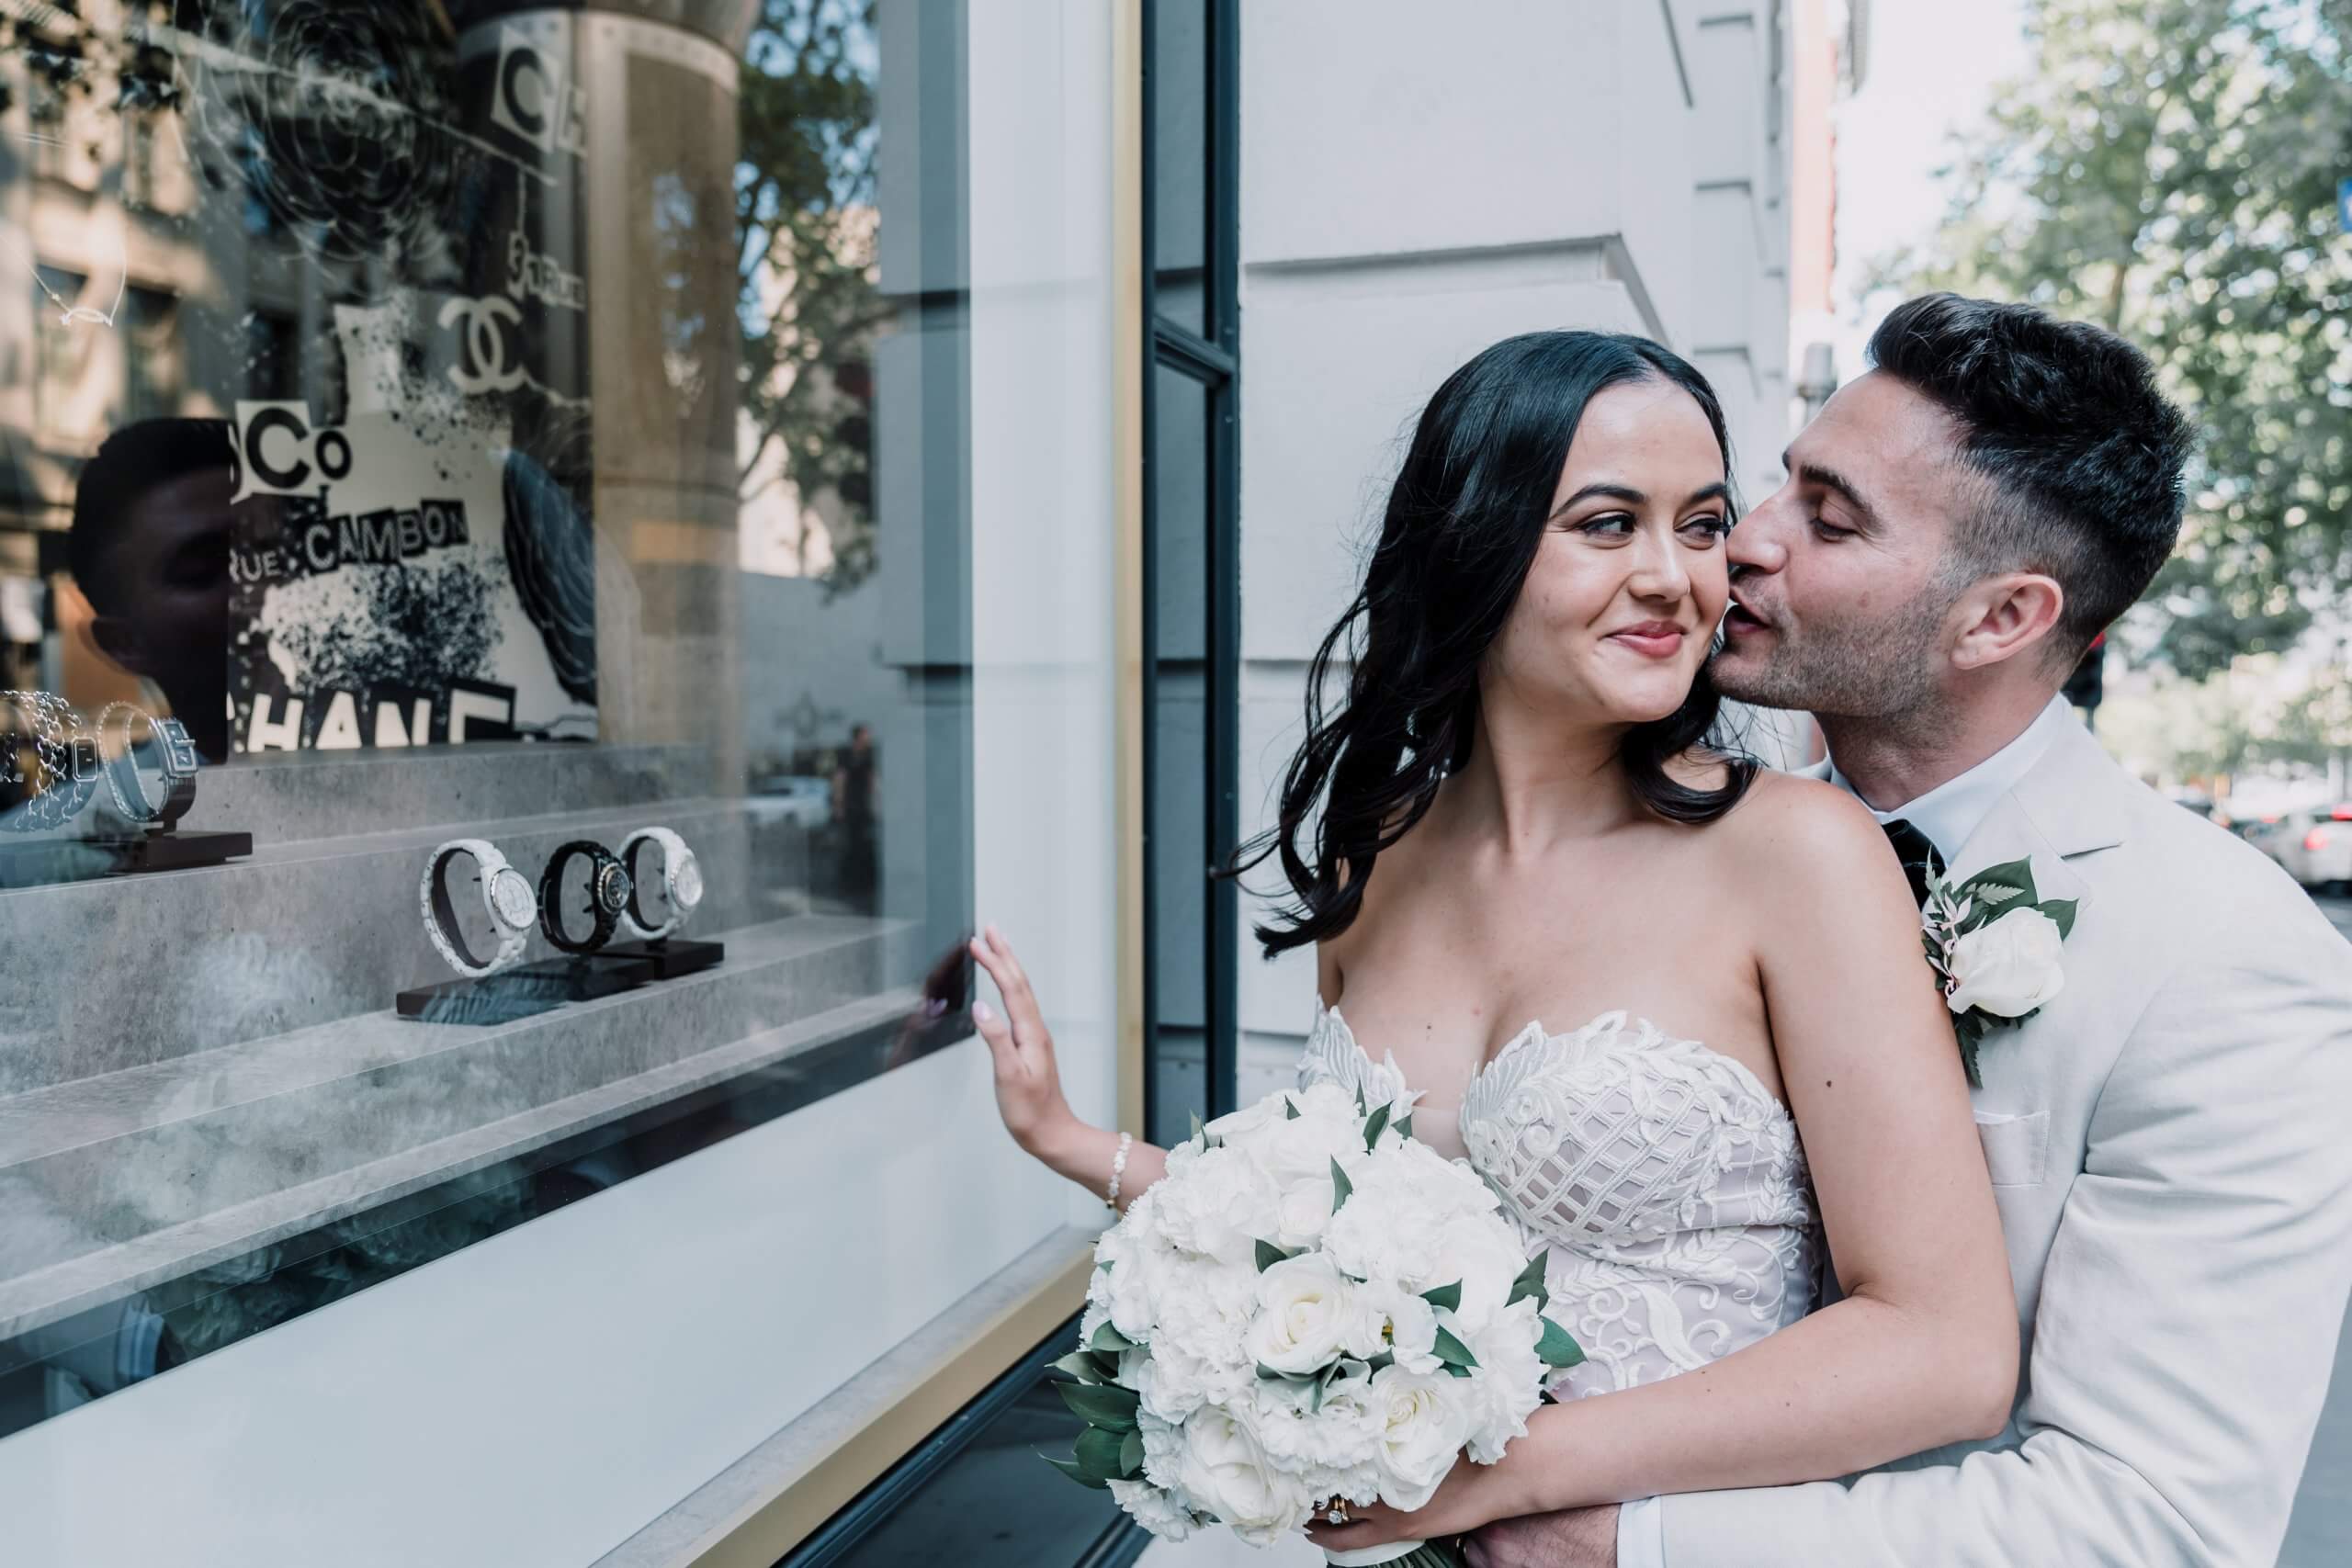 Lovely couple happily pose outside a store window in the city, captured by black avenue productions